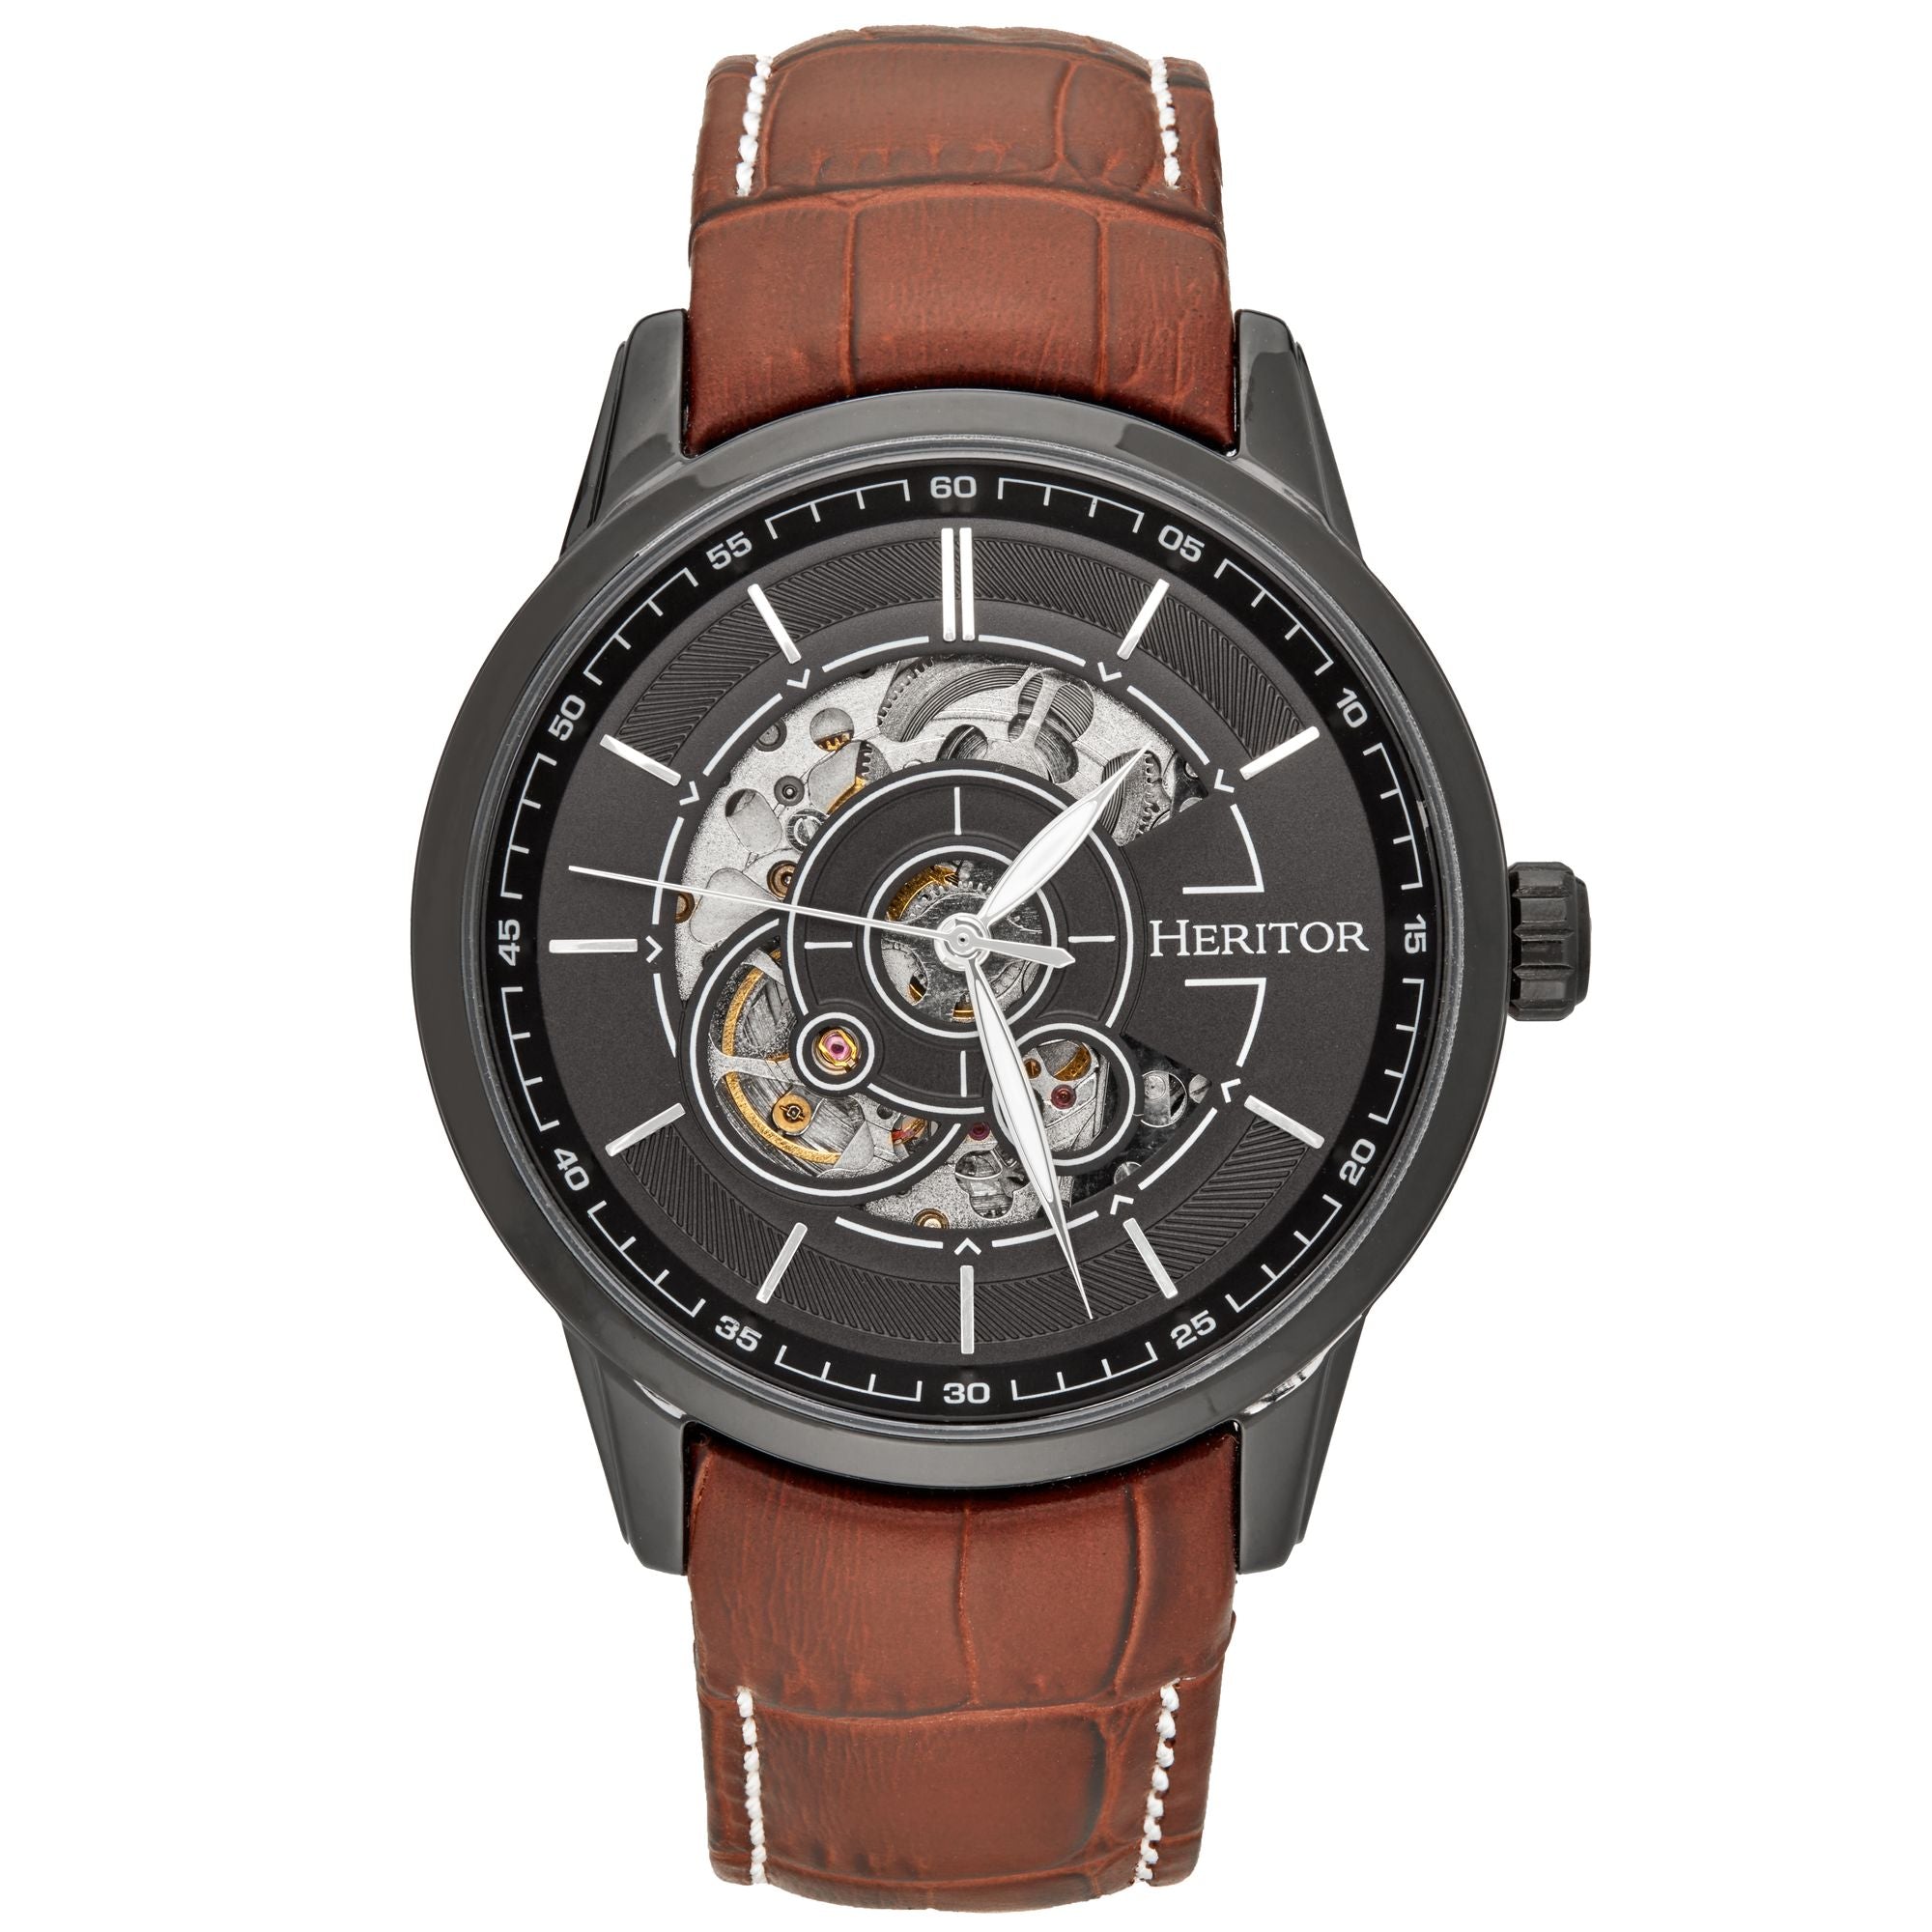 Men’s Black / Brown Davies Semi-Skeleton Leather-Band Watch - Black, Brown One Size Heritor Automatic